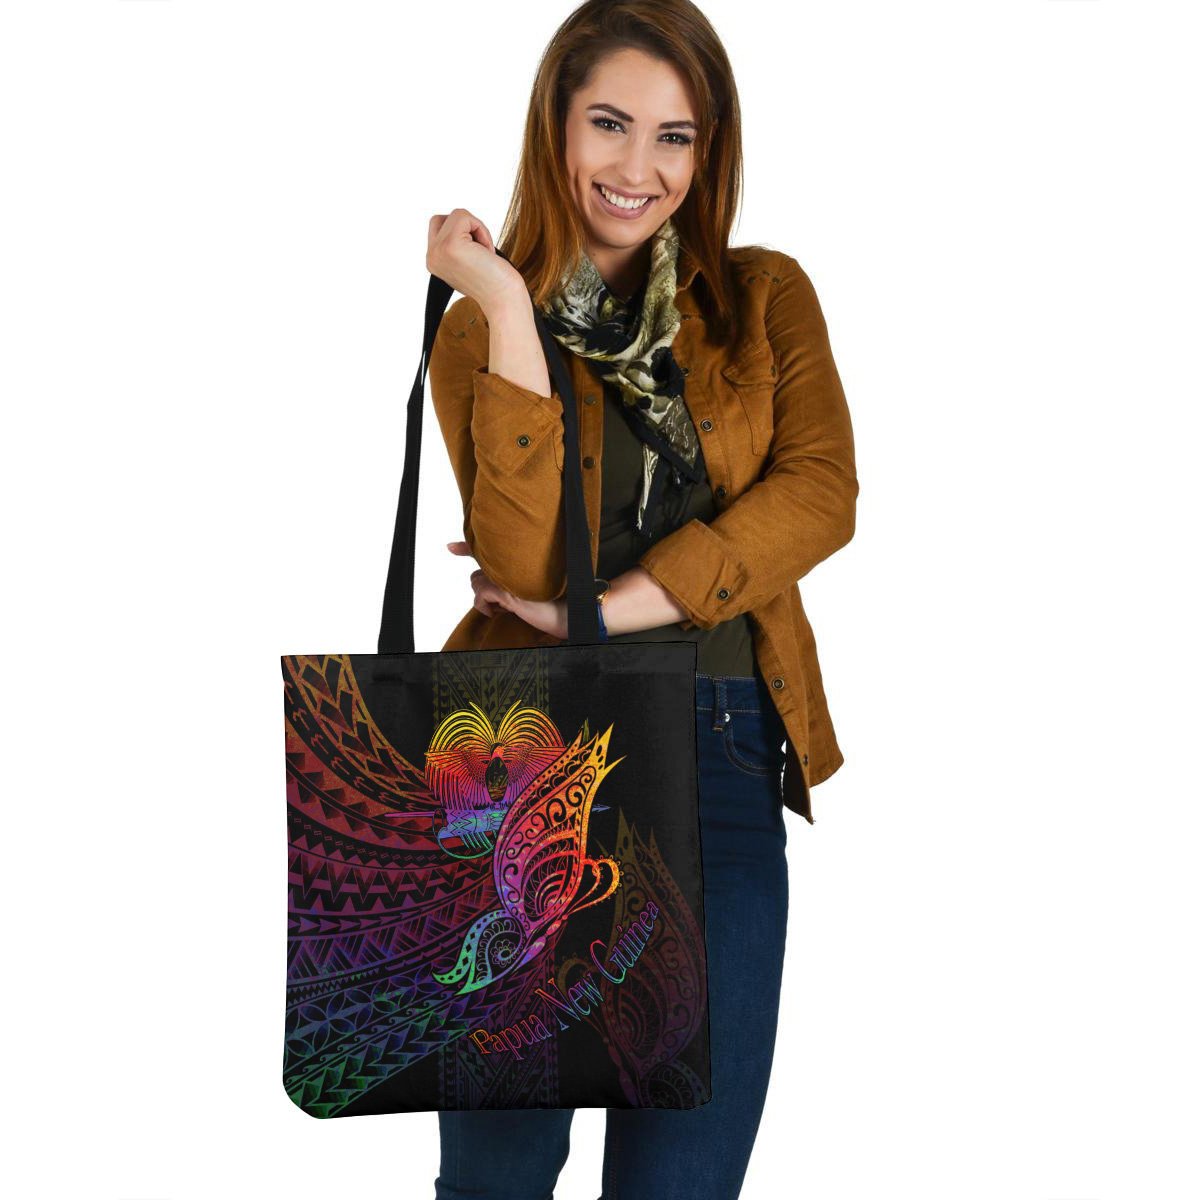 Papua New Guinea Tote Bag - Butterfly Polynesian Style Tote Bag One Size Black - Polynesian Pride